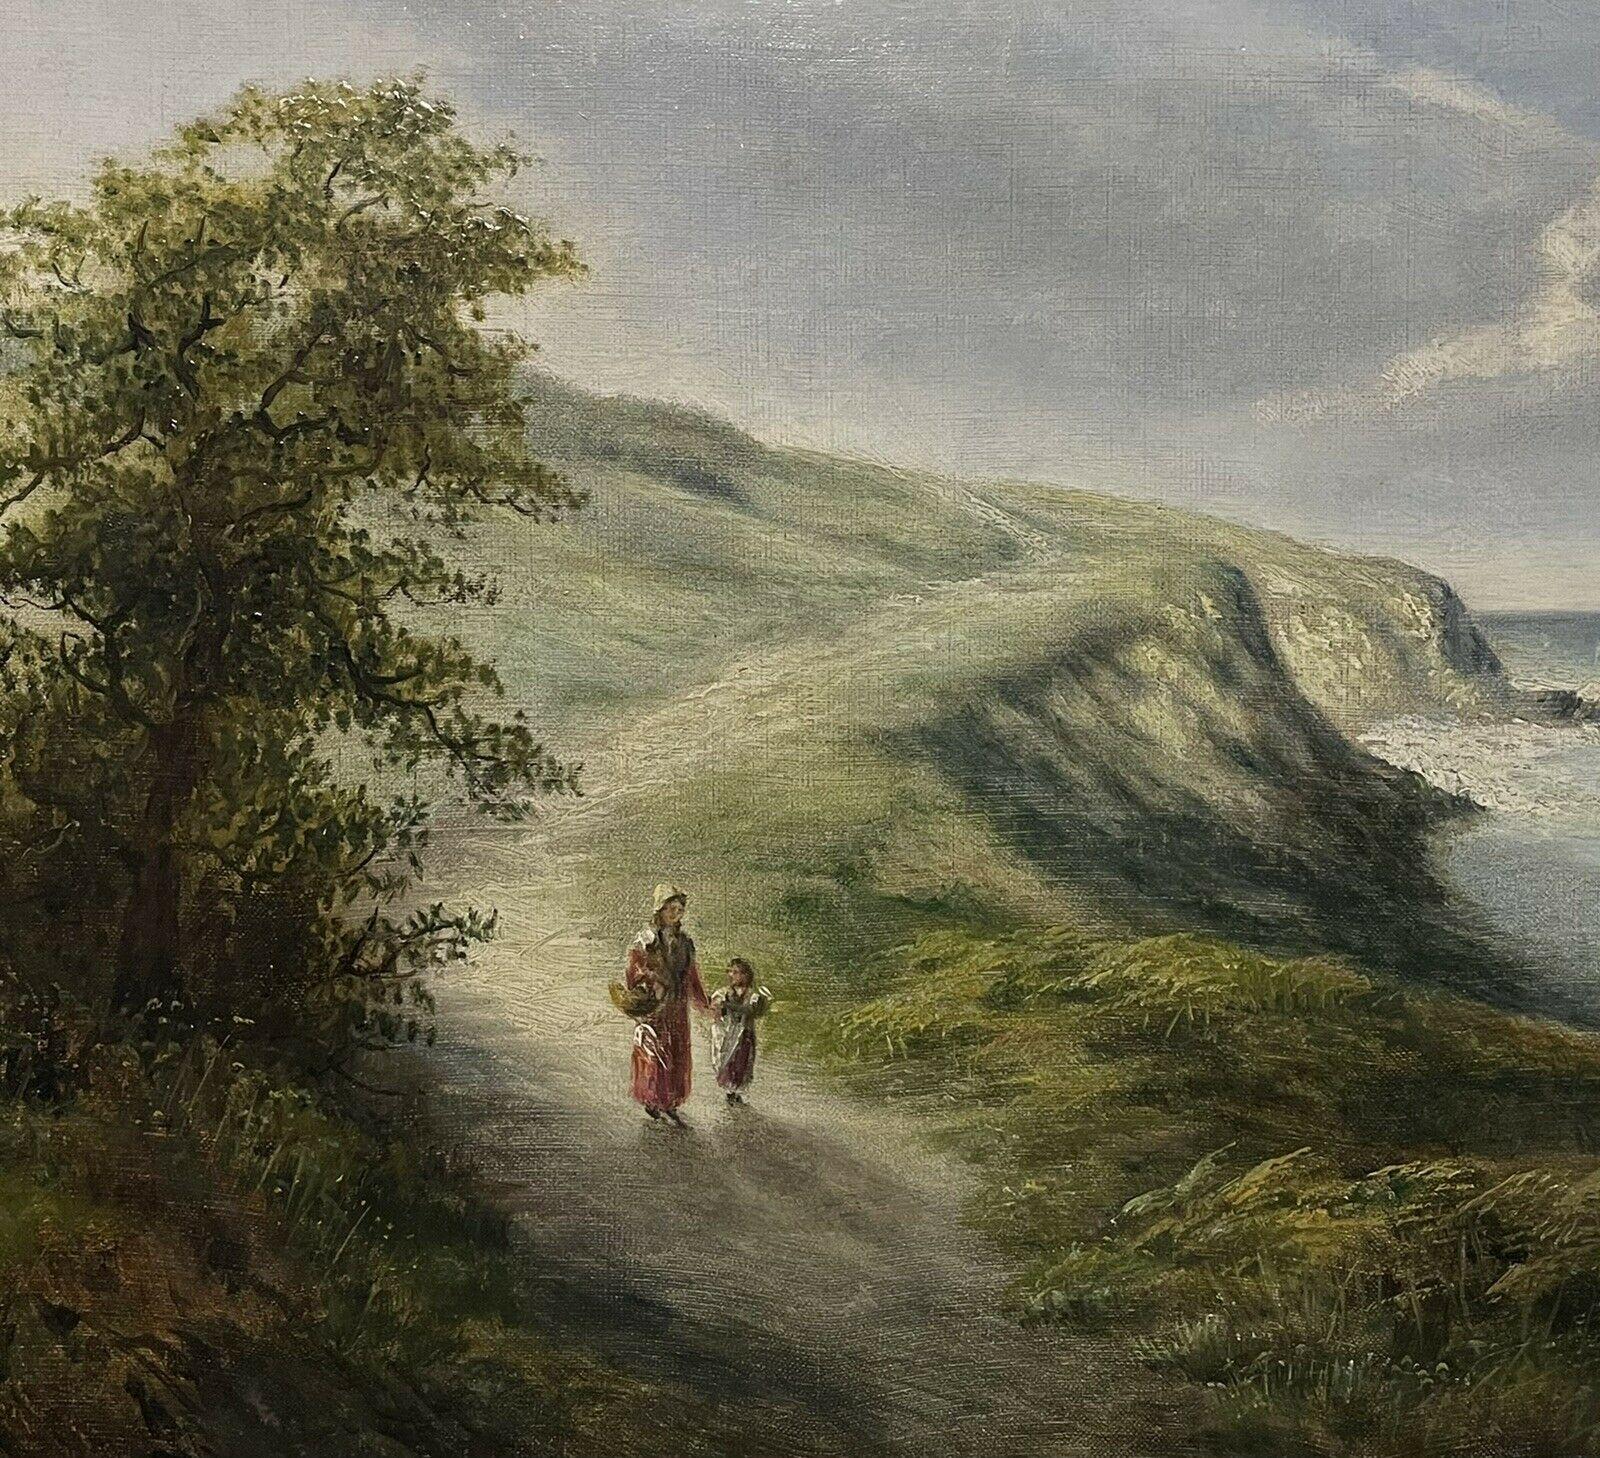 
Artist/ School: British School, late 19th/ early 20th century

Title: Mother & Daughter walking along the coastal path, with the sea beside them. 

Medium: oil painting on canvas, framed

framed:   19.5 x 27.5 inches
canvas:   16 x 24